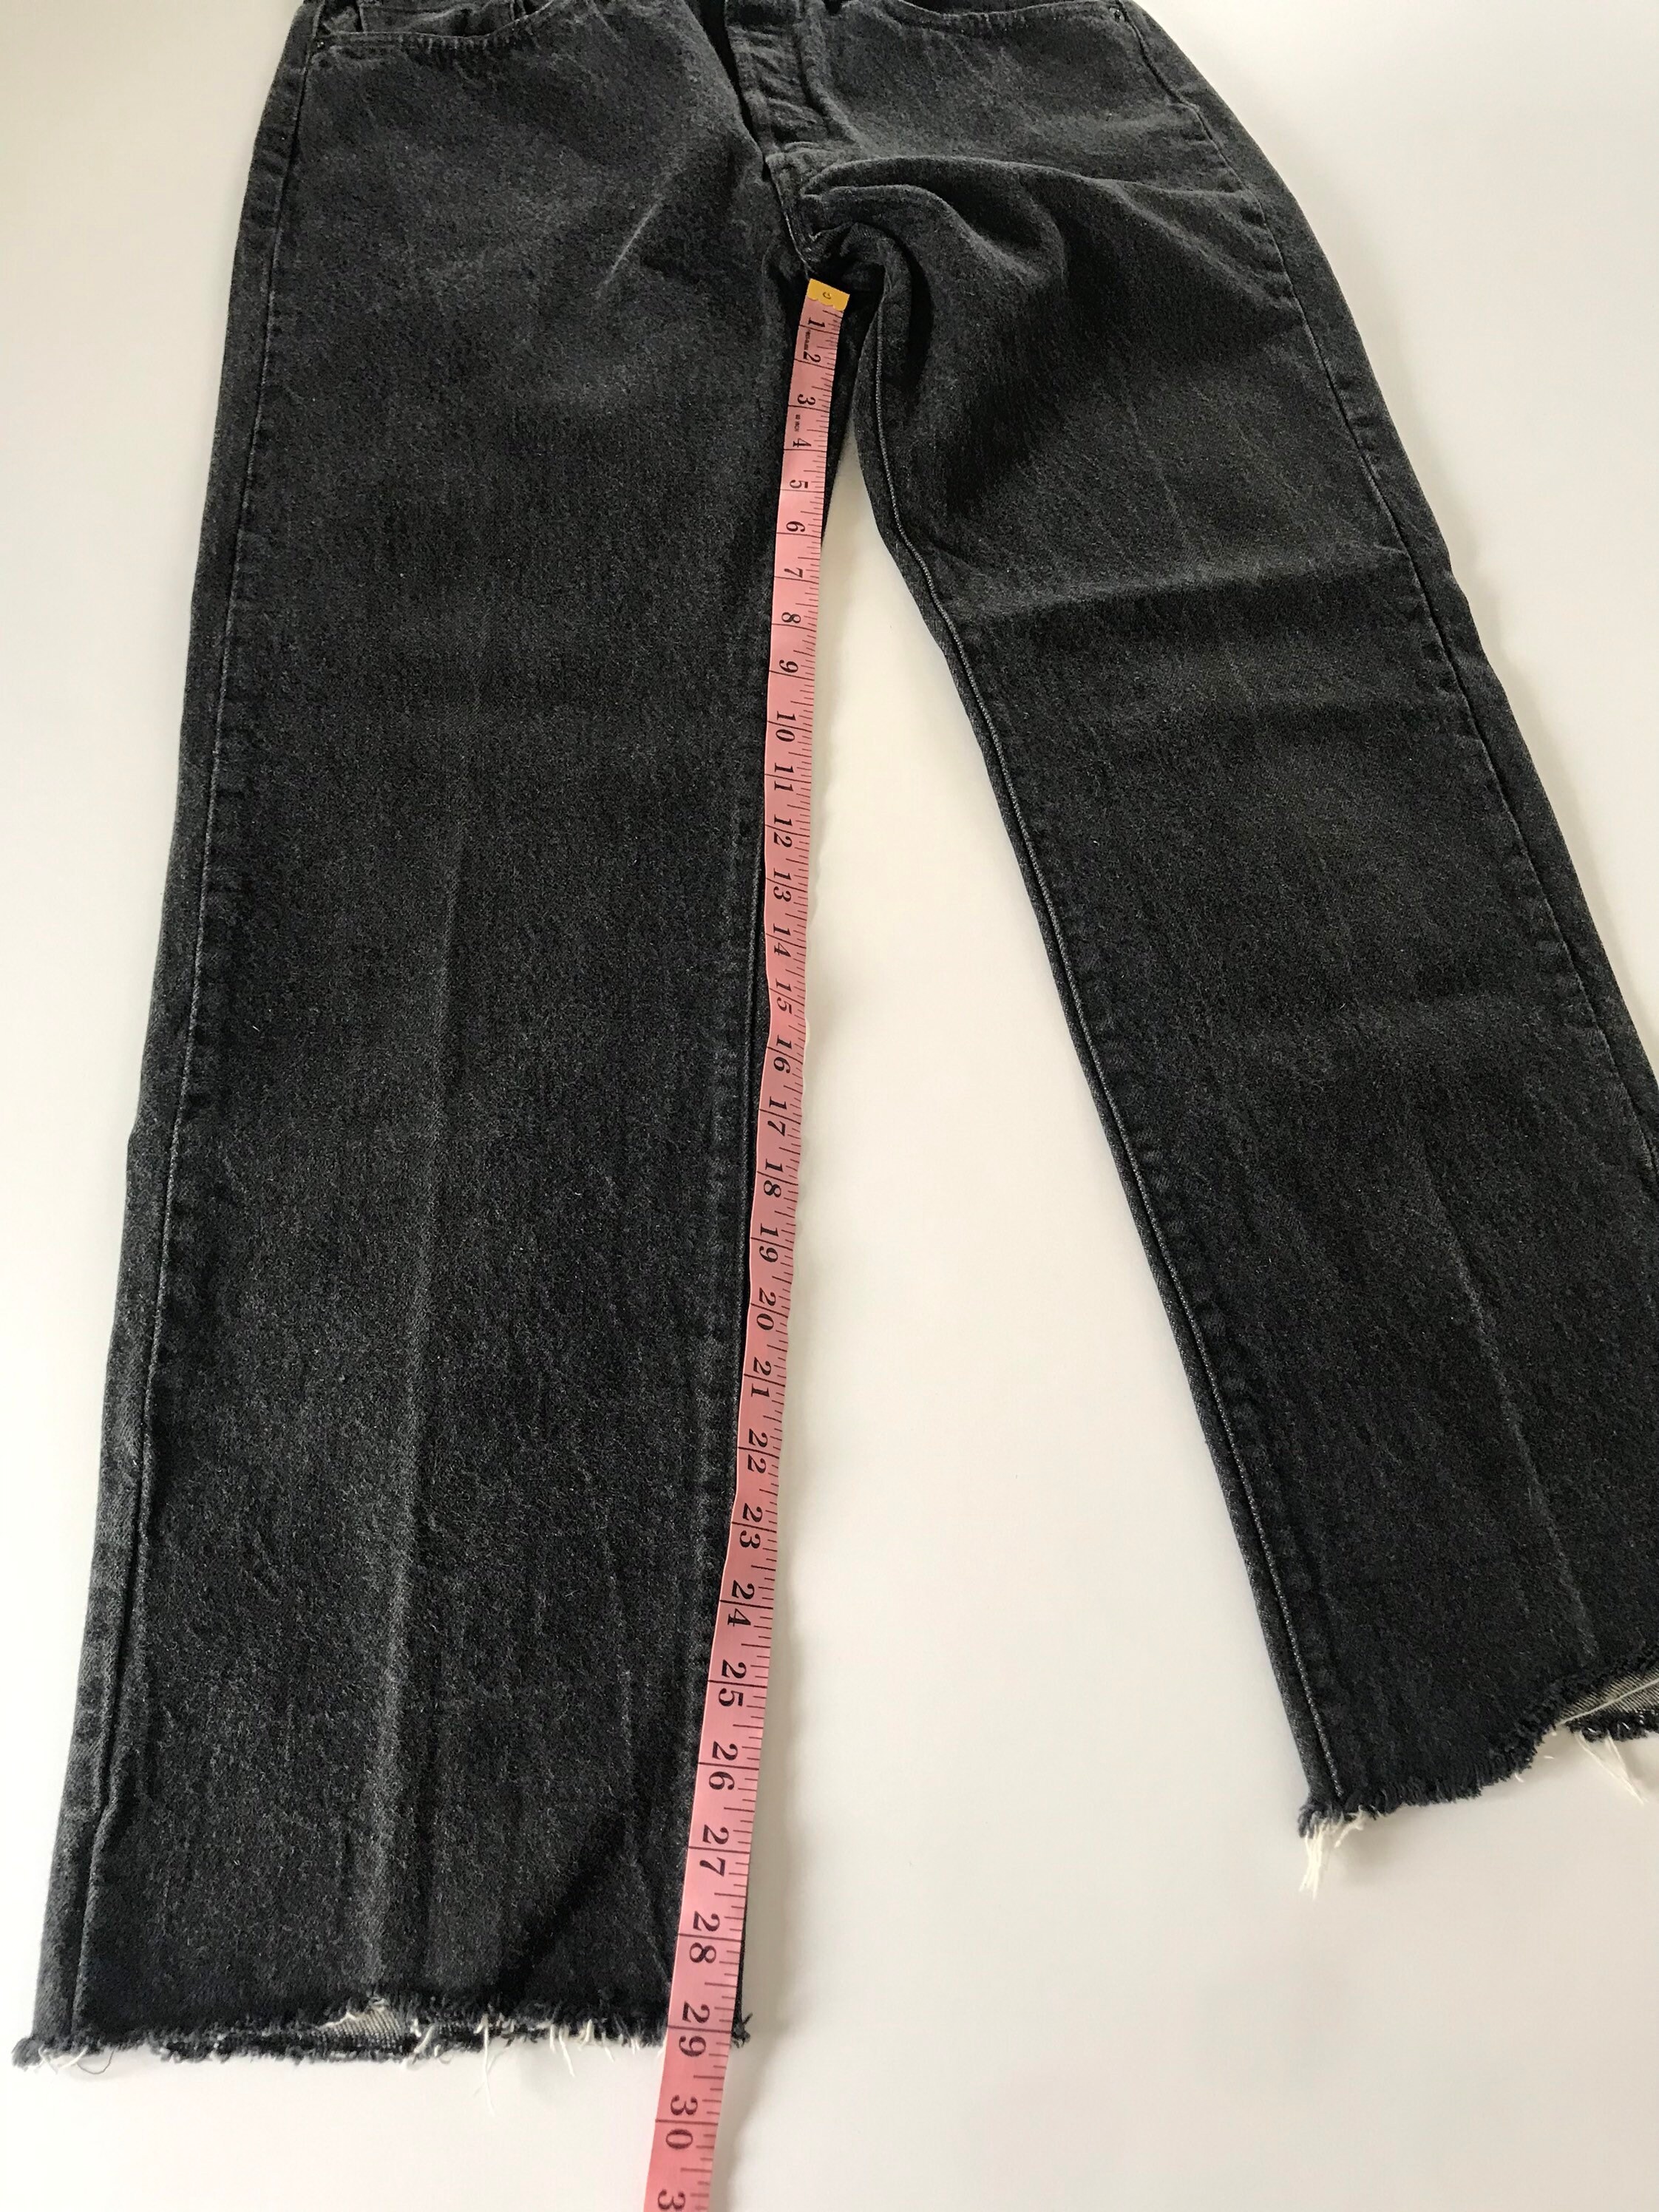 1980s, 90s, Vintage Levis 501 Raw Hem Jeans, Made in USA, Button 